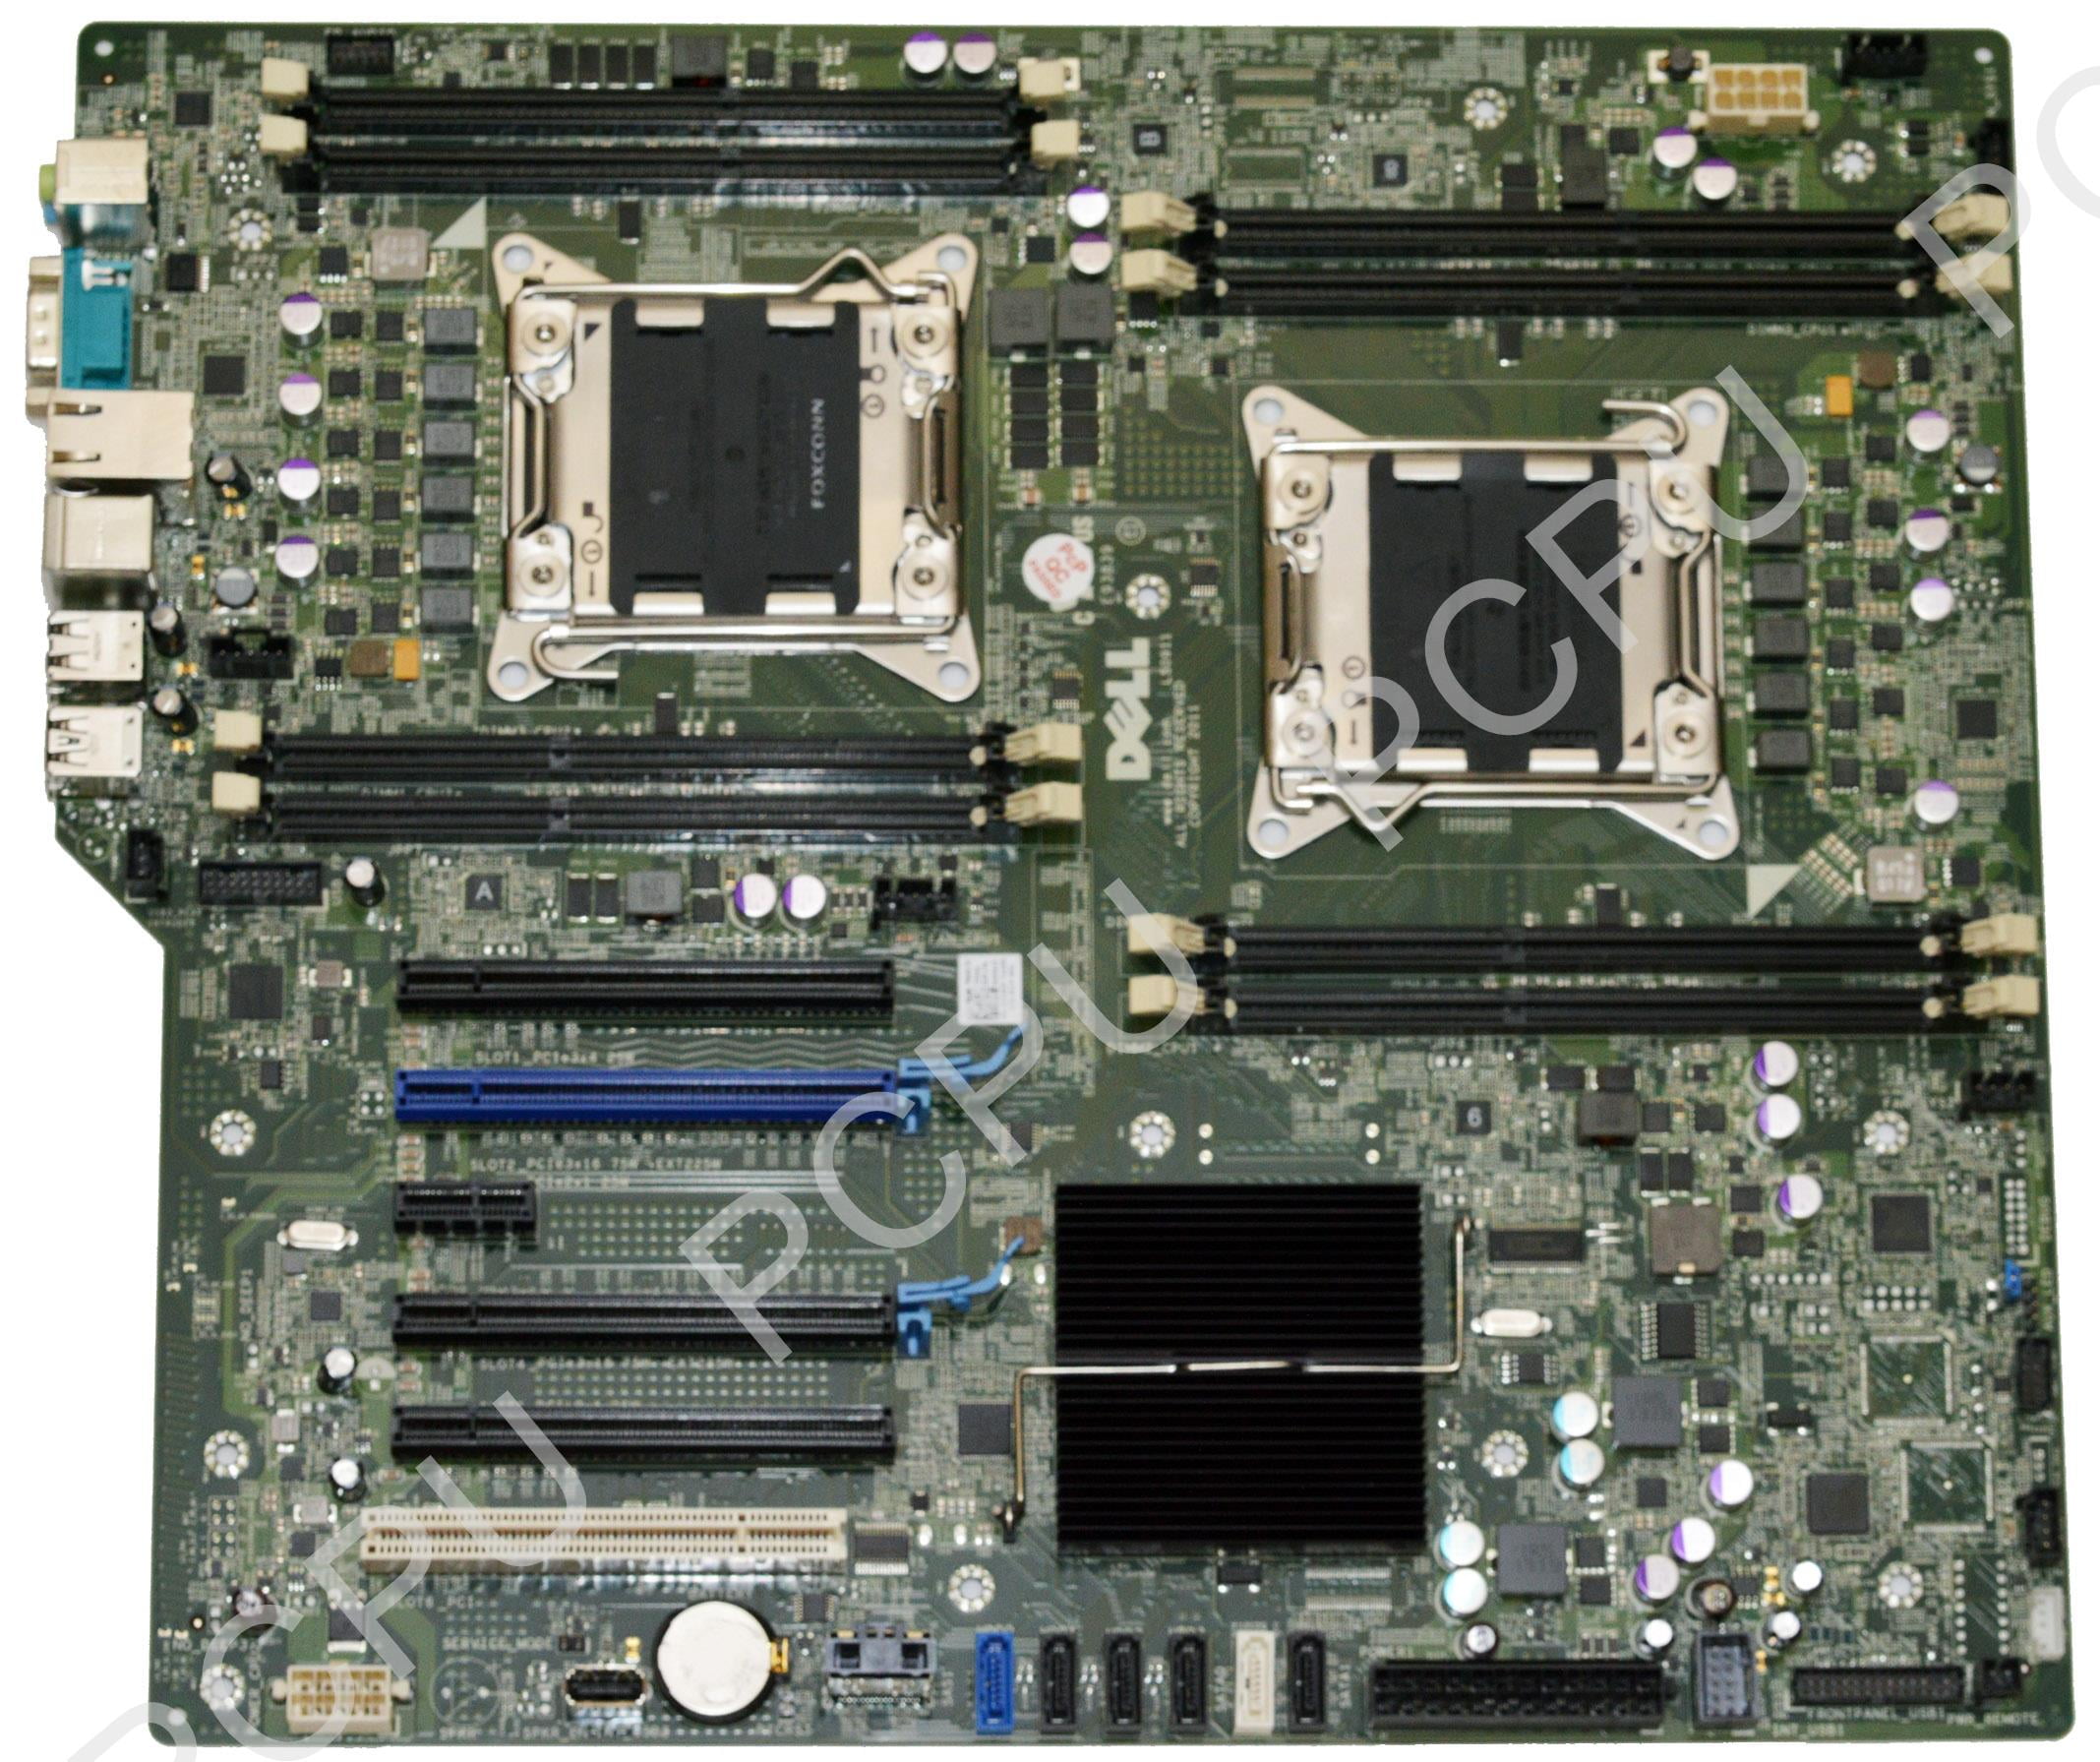 GN6JF Dell Precision T5600 Server Dual Motherboard s2011